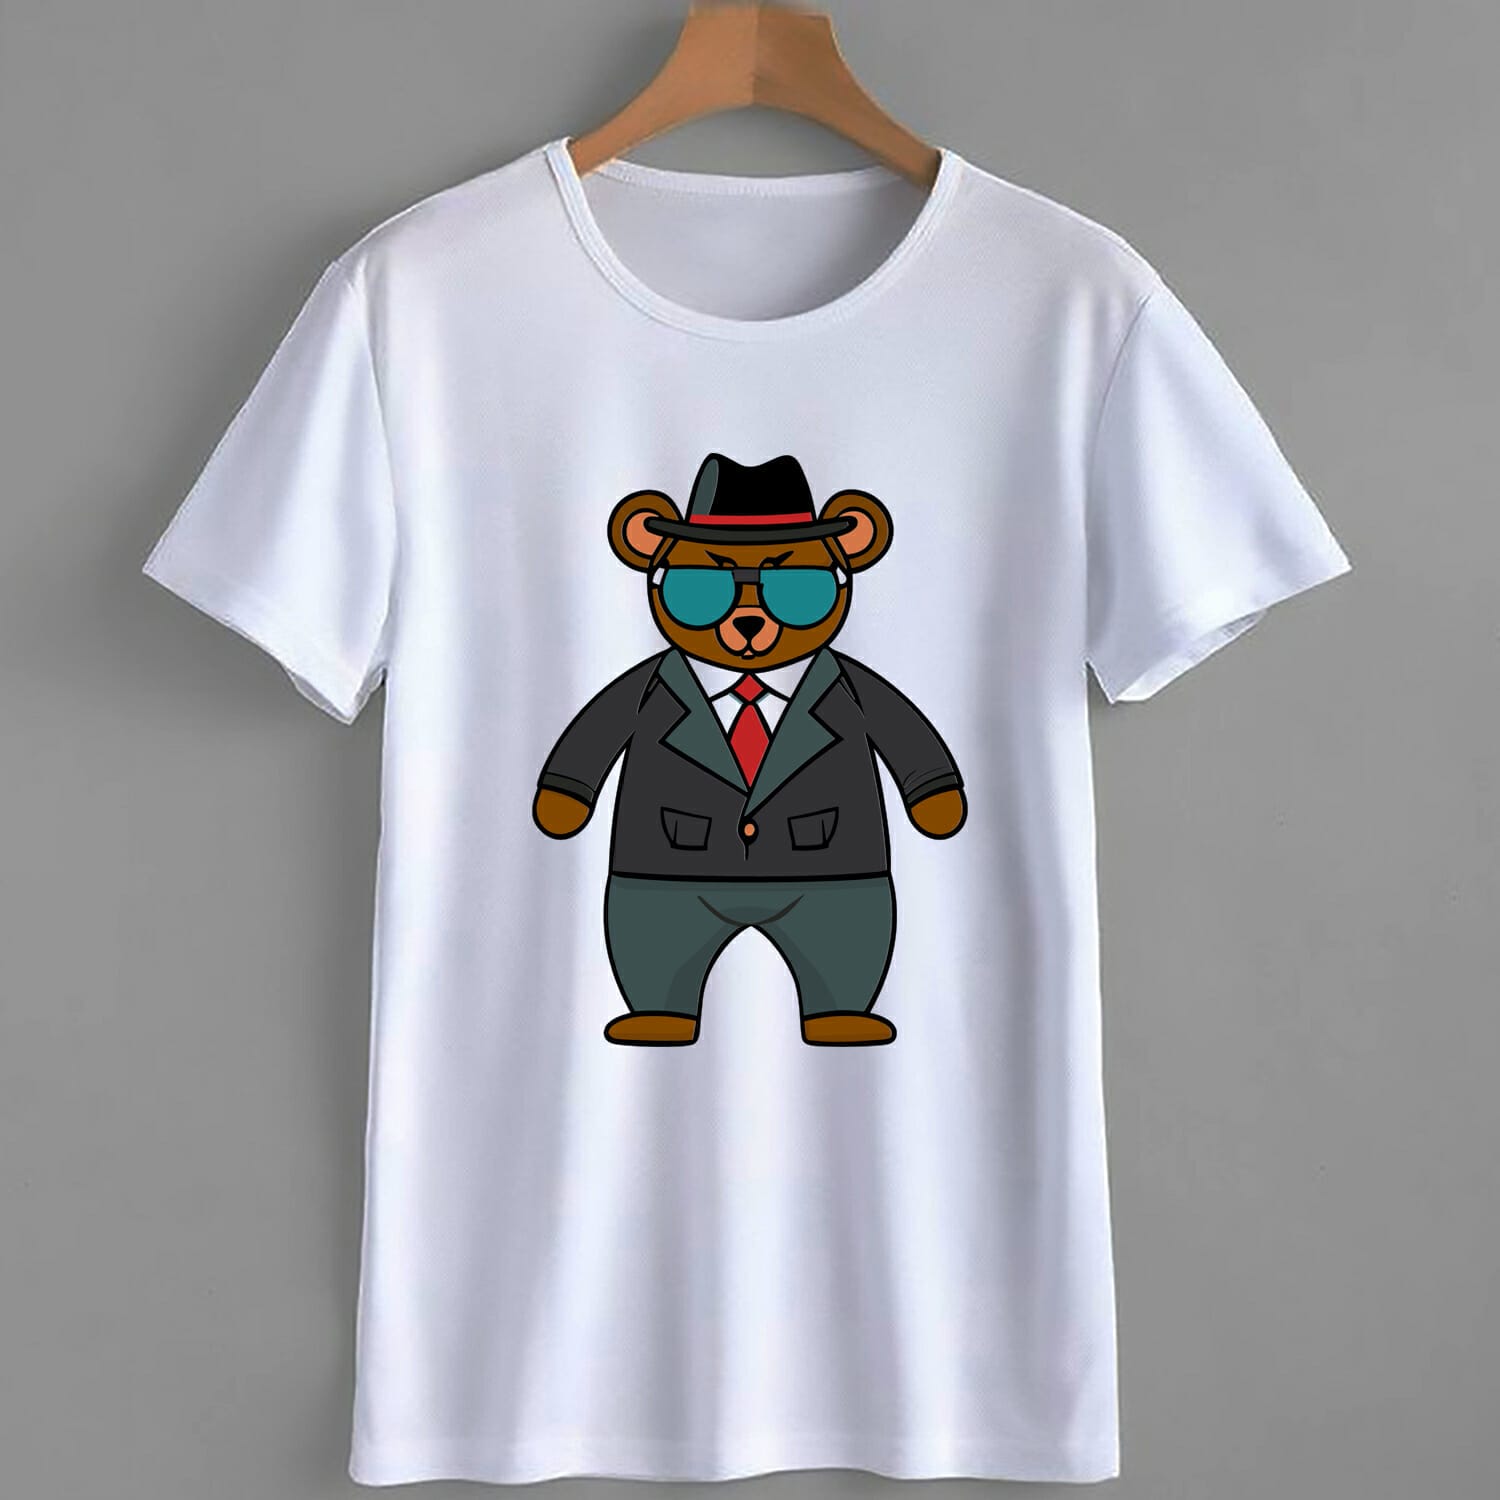 Gangster Teddy Bear With Glasses T-Shirt Design